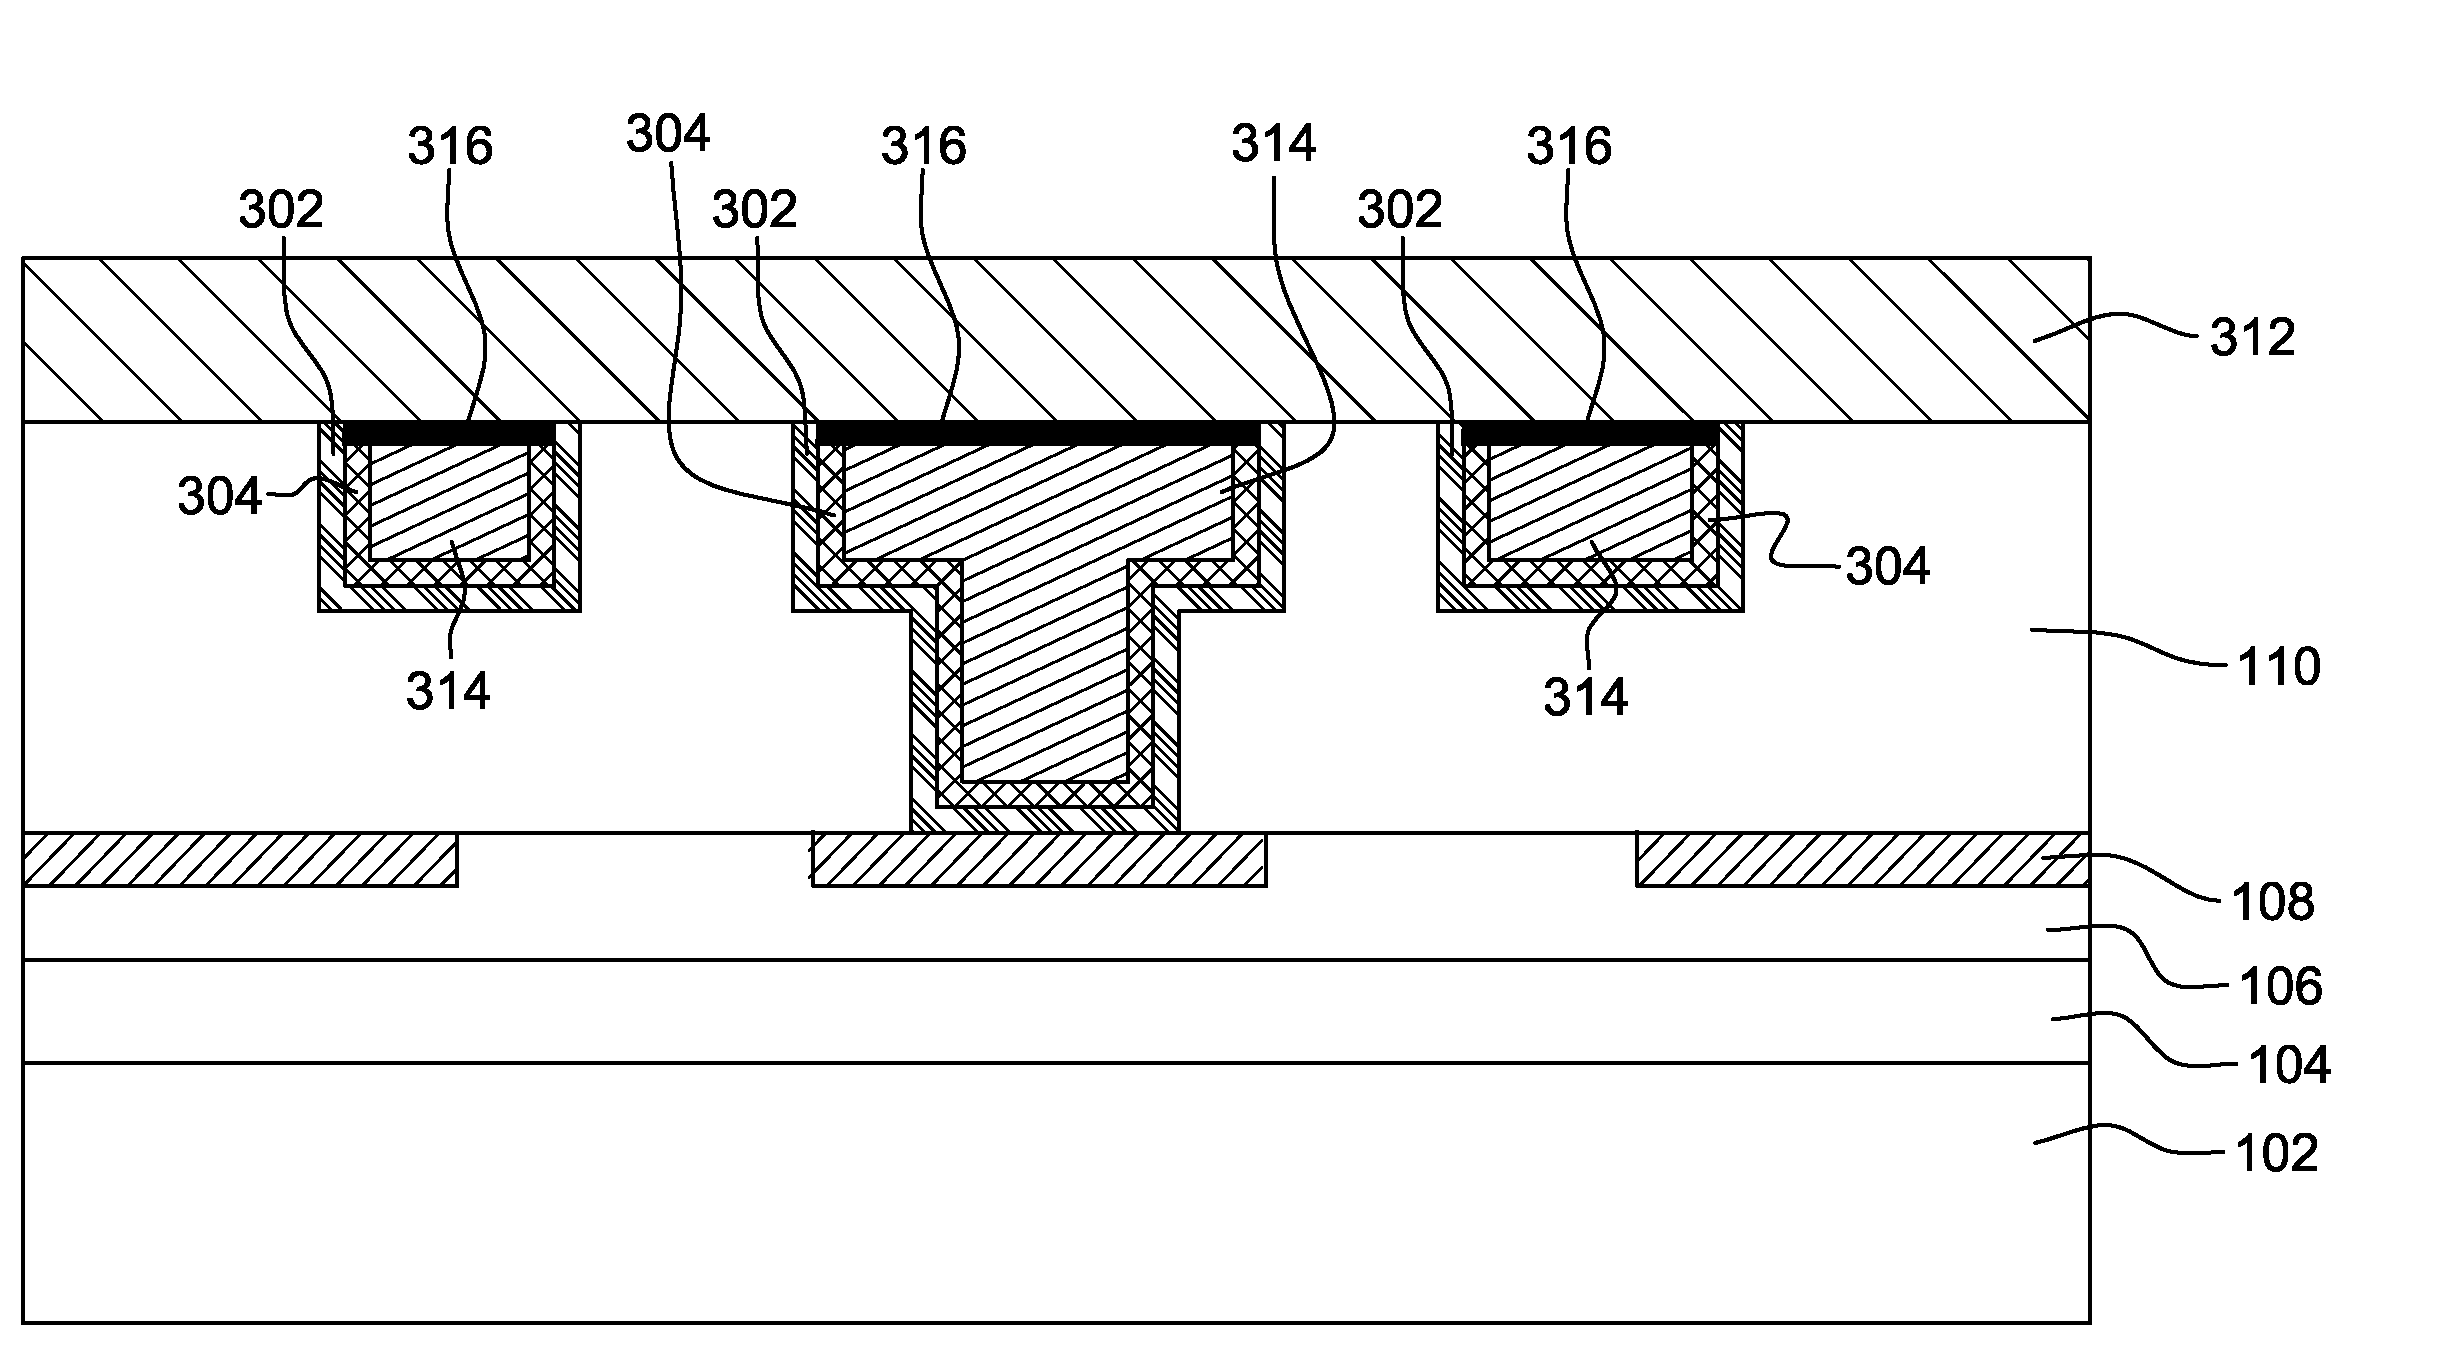 Semiconductor interconnect structure having enhanced performance and reliability